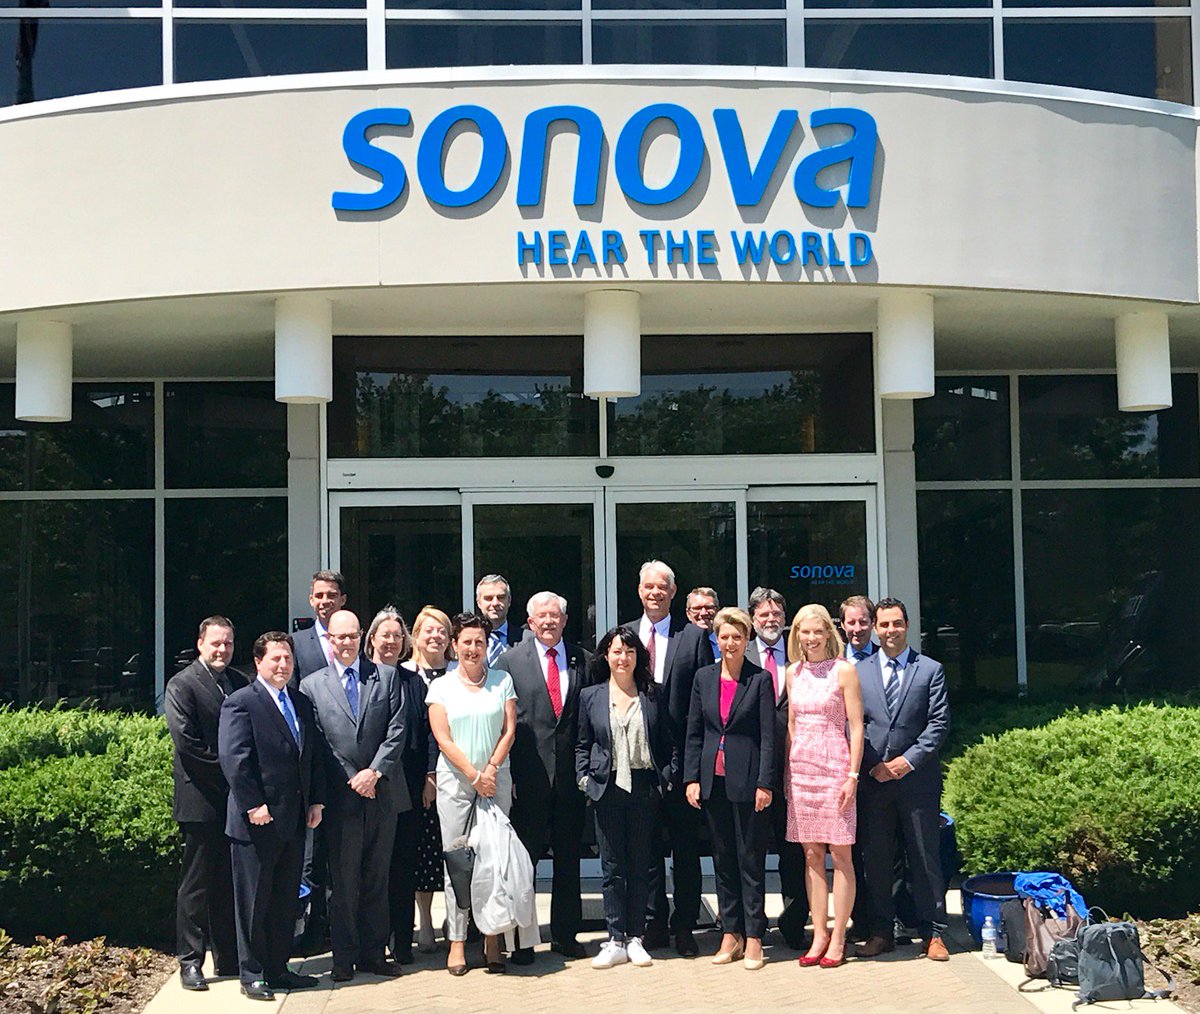 #Swiss delegation, #KarinKellerSutter and Amb @Martin_Dahinden visited #Swiss company @SonovaGroup in #Chicago - leading in #hearingaid industry and experienced a great tour! #HearTheTechnology #Innovation #ThinkSwiss #LifeWithoutLimitations